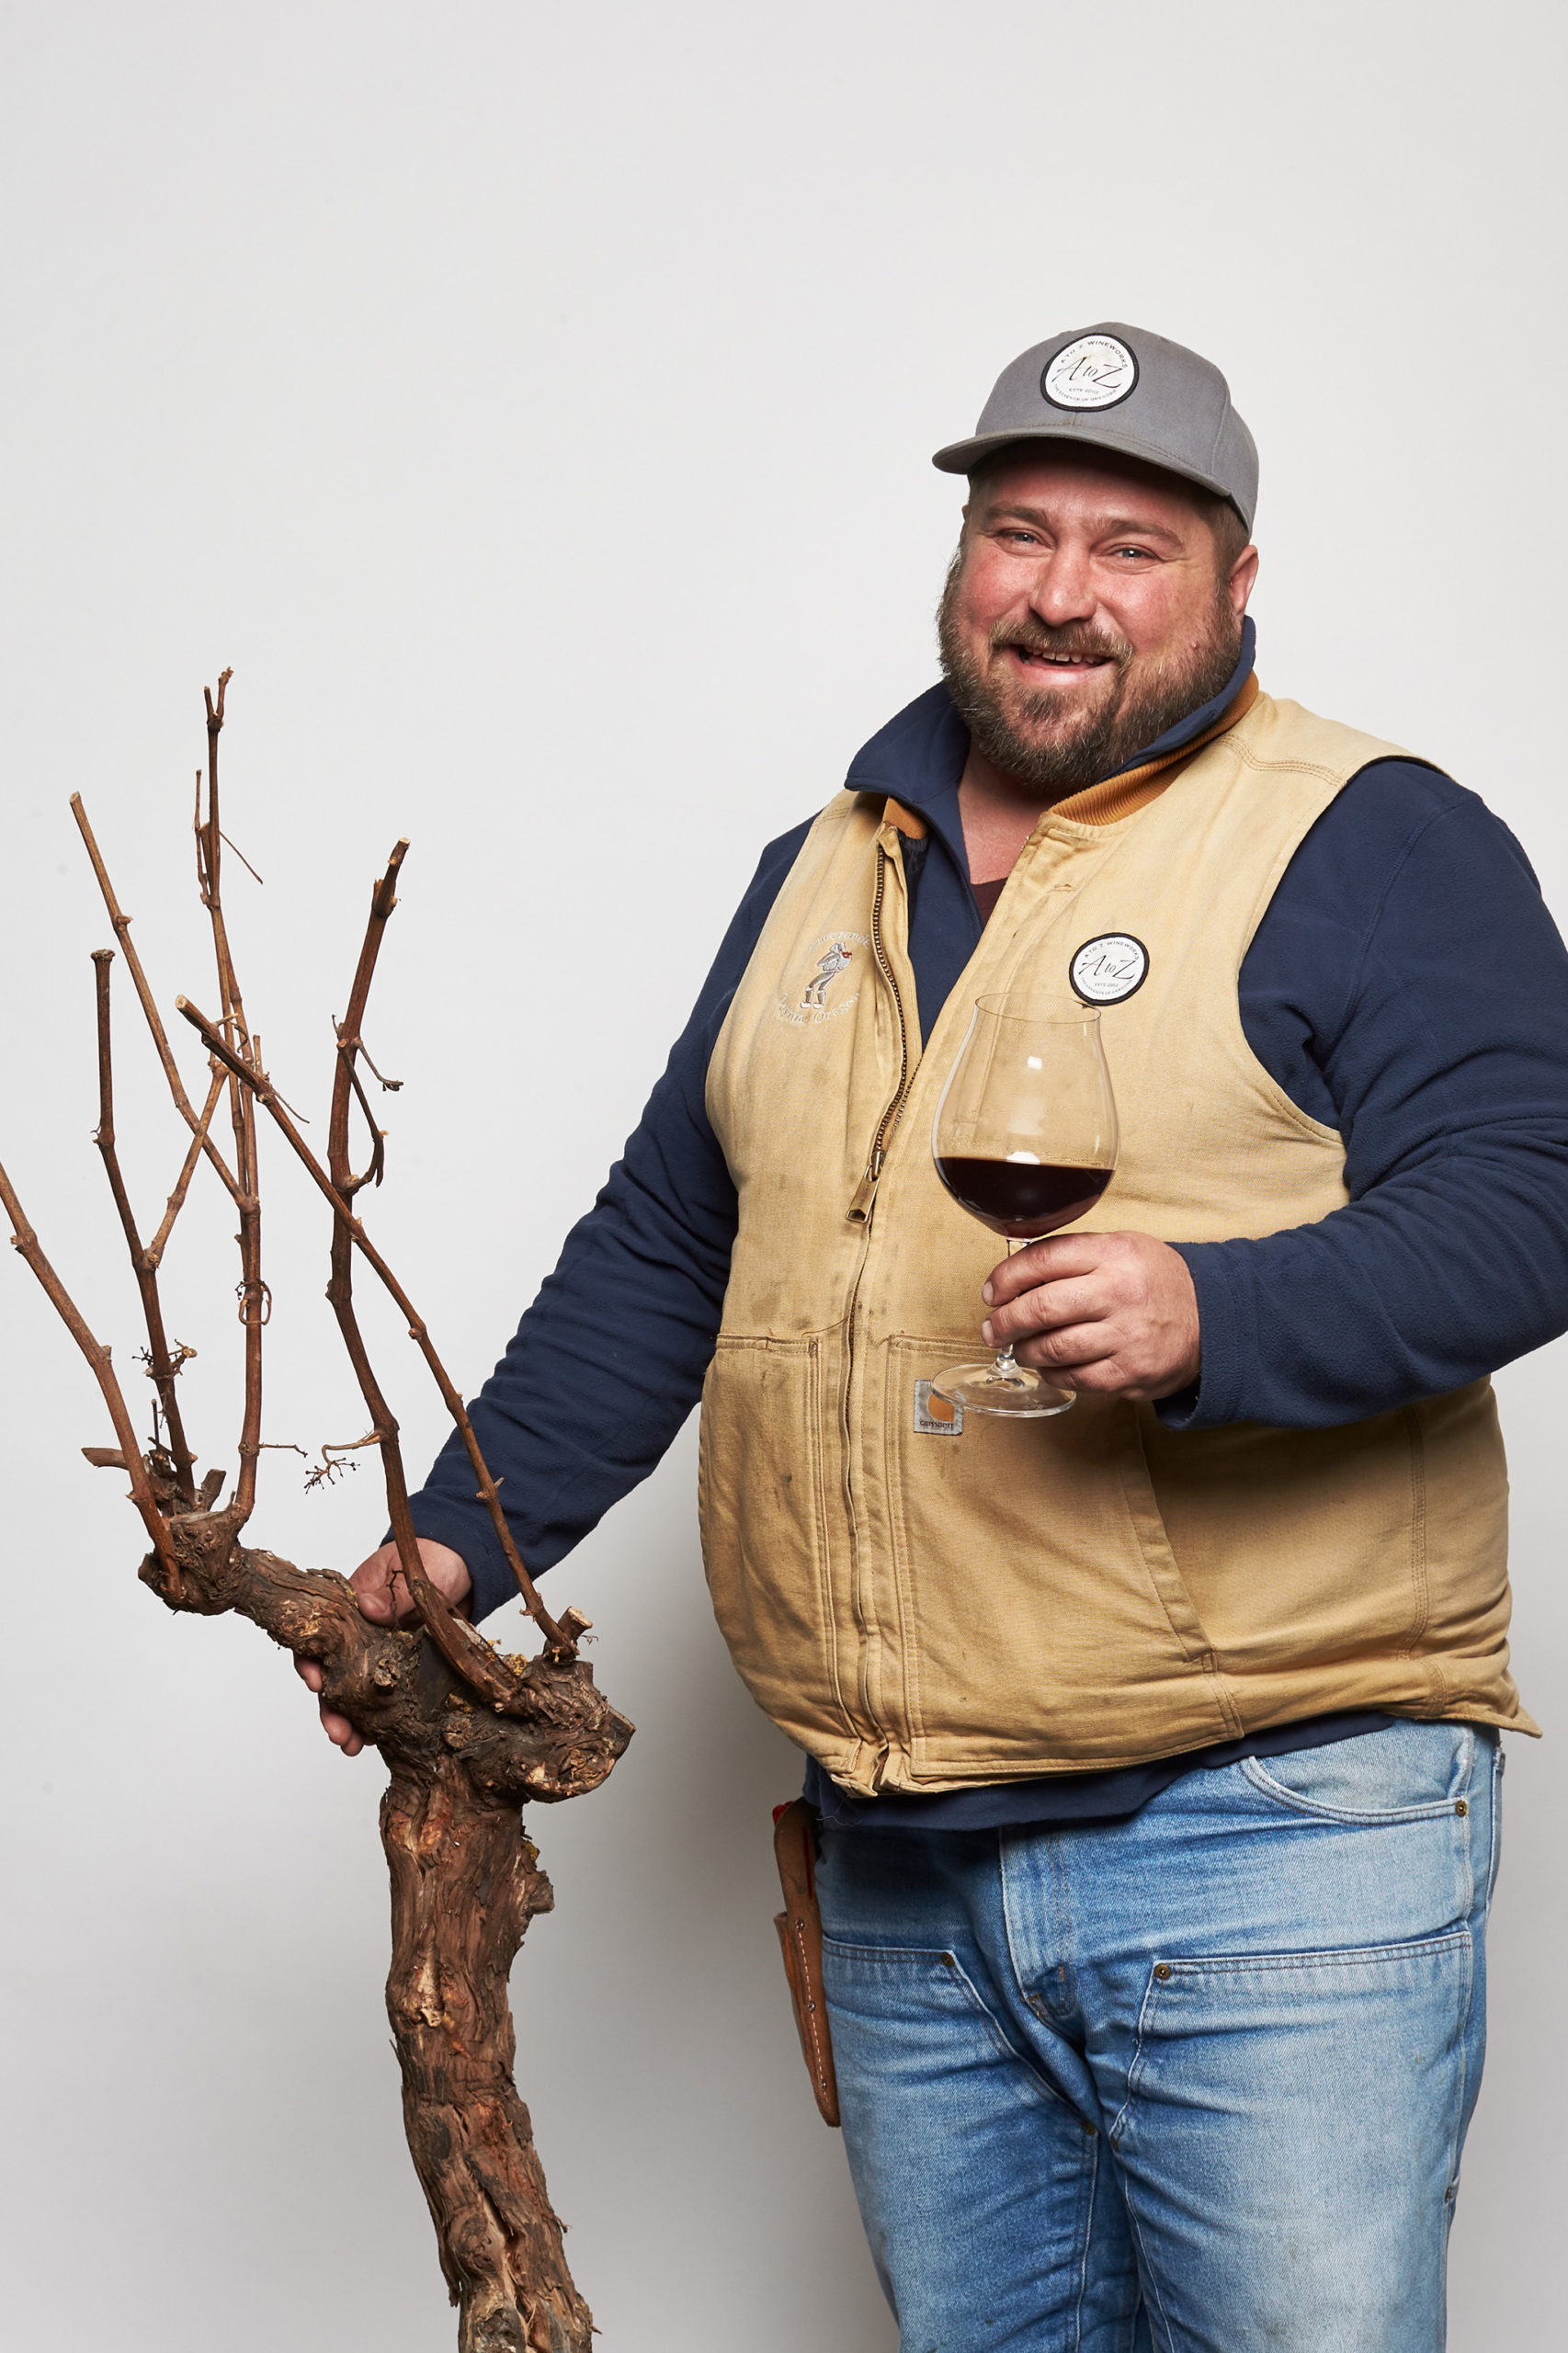 Joey holding old vine and wine